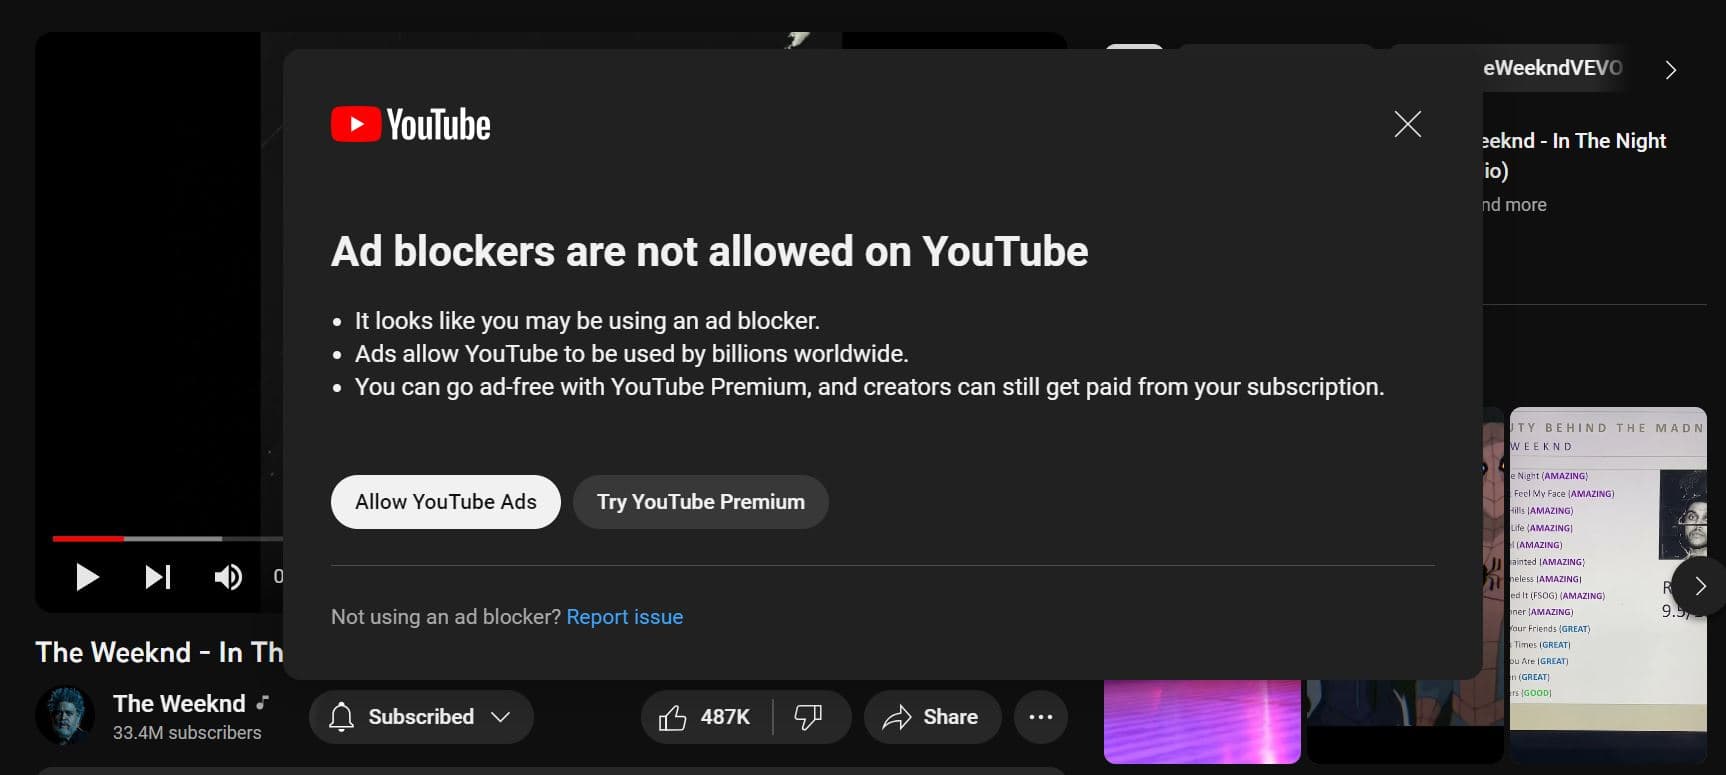 YouTube Cracks Down On Ad-Blockers, Demands Users Disable To View Content